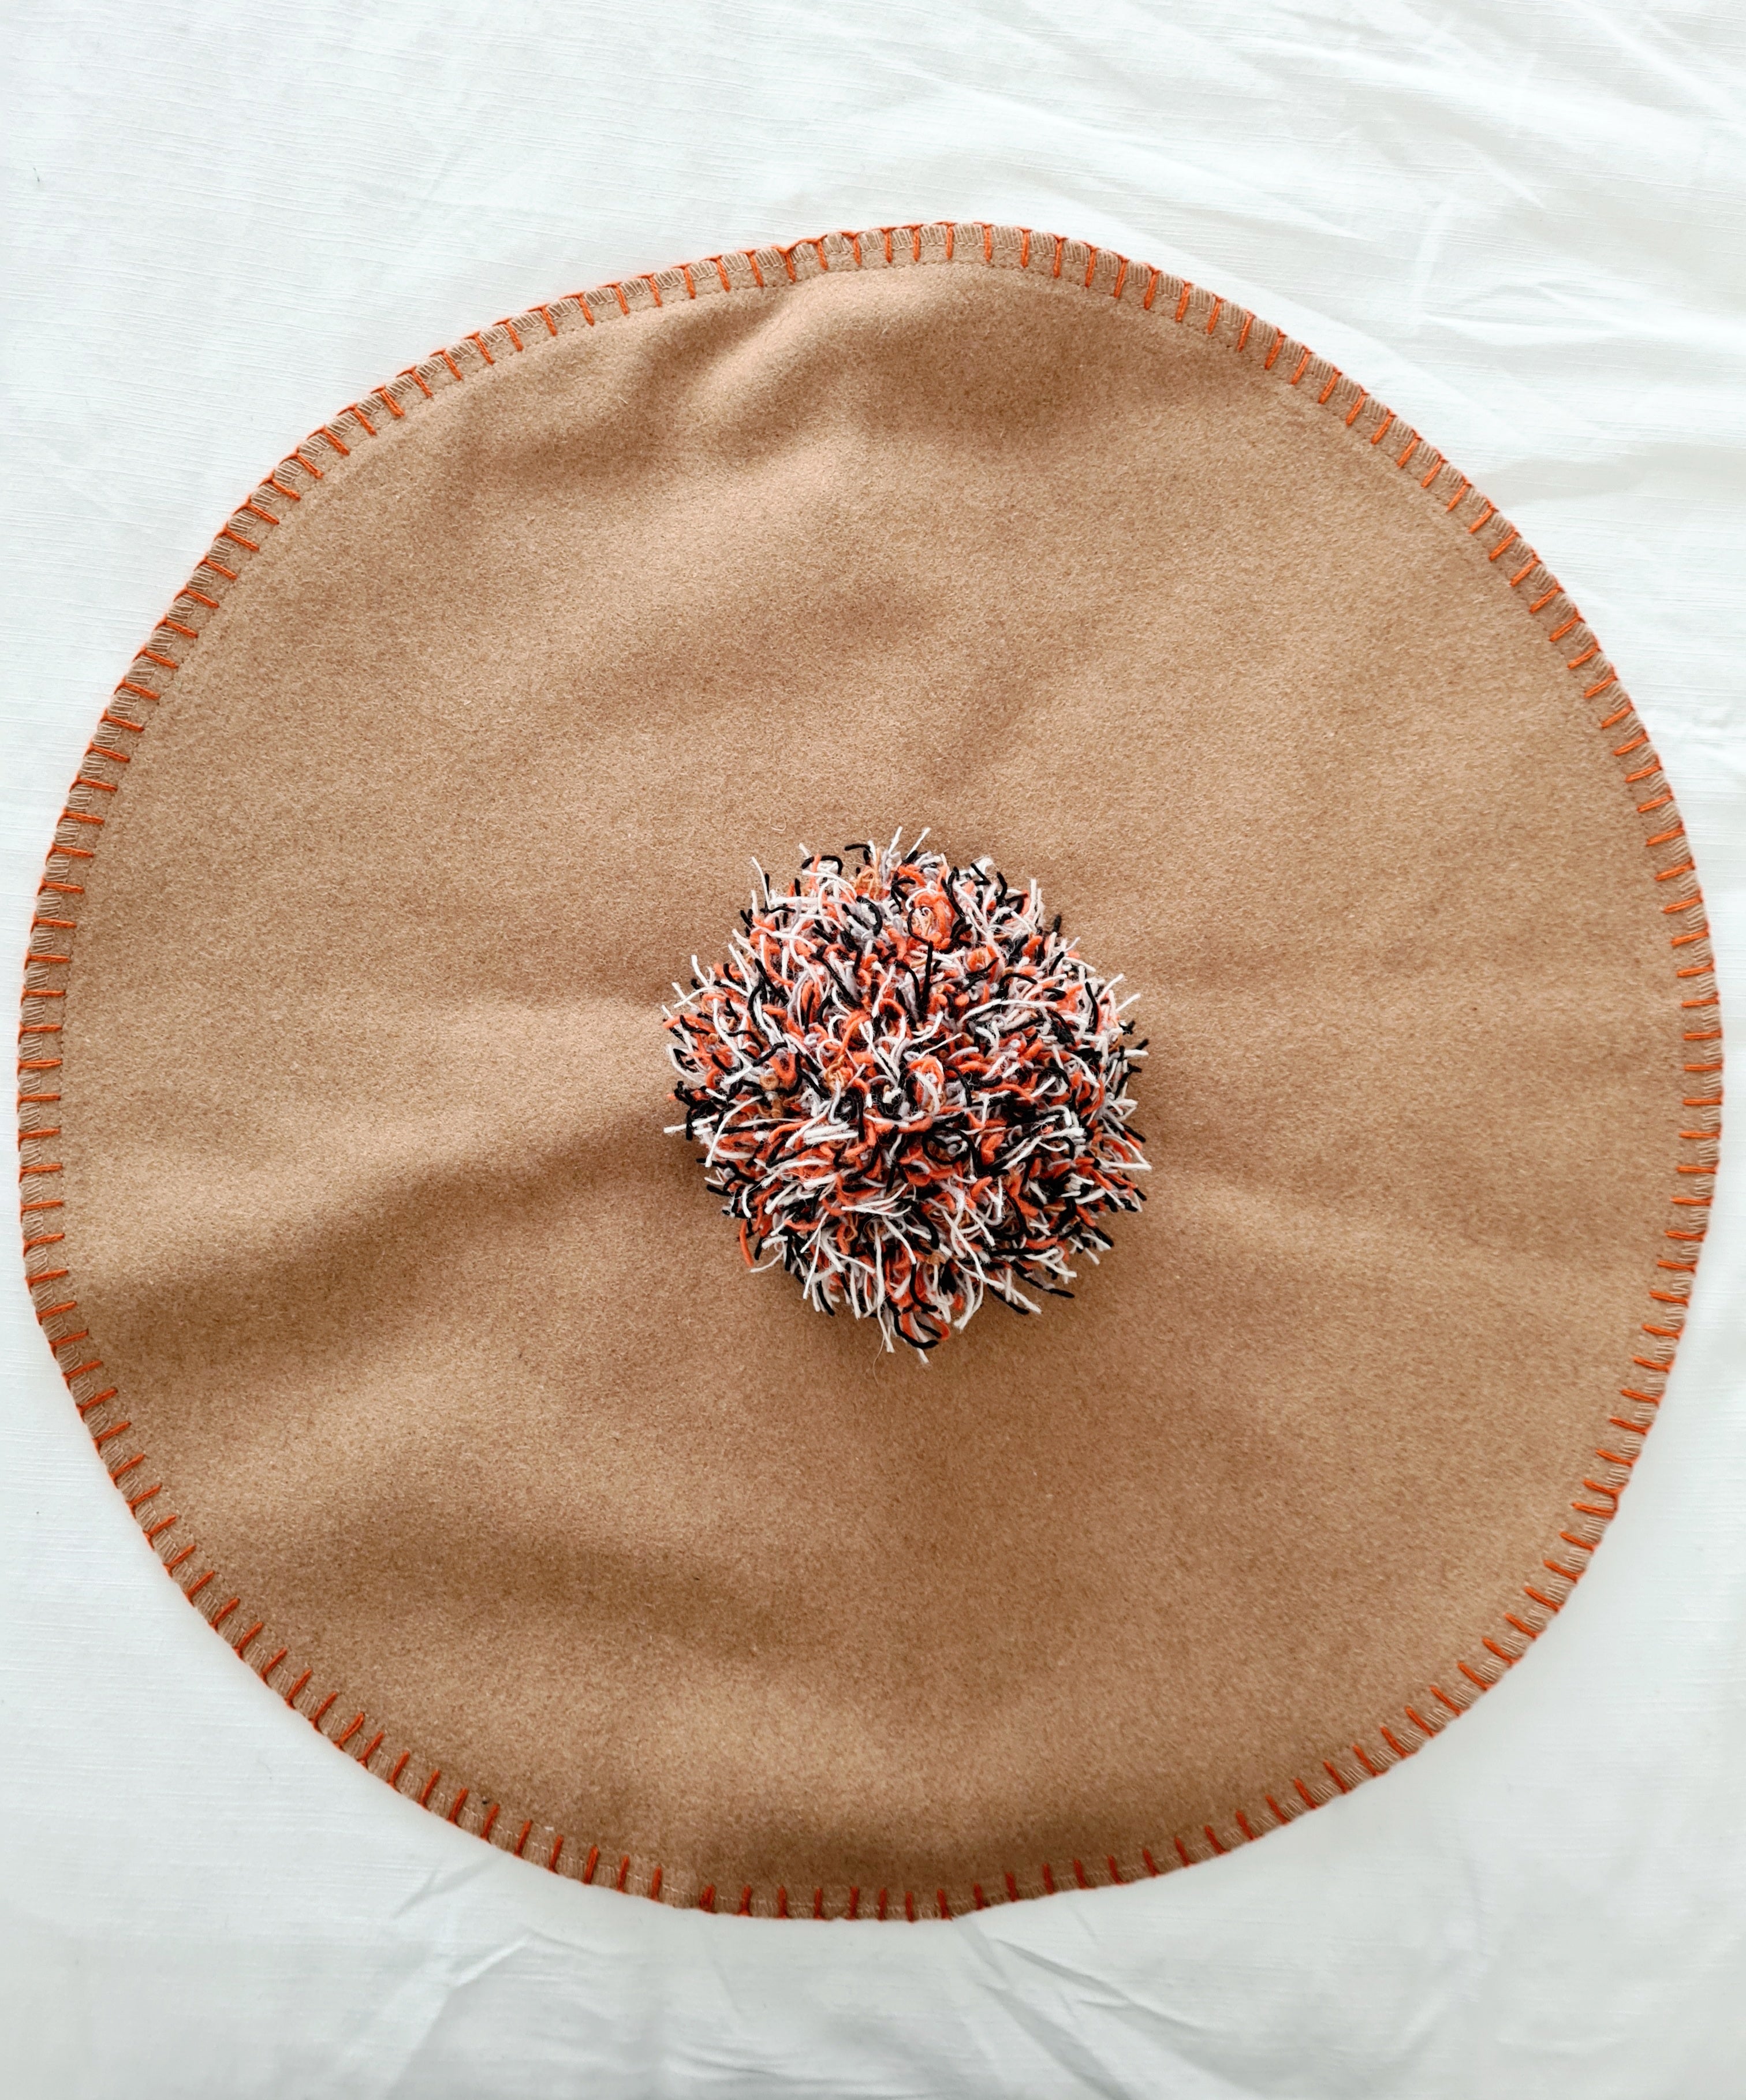 Limited Edition Organic Wool Cushions - Hessian Pony AW 2022 Ottoman Cushions The Spotted Quoll 45cm Caramel & Rust 